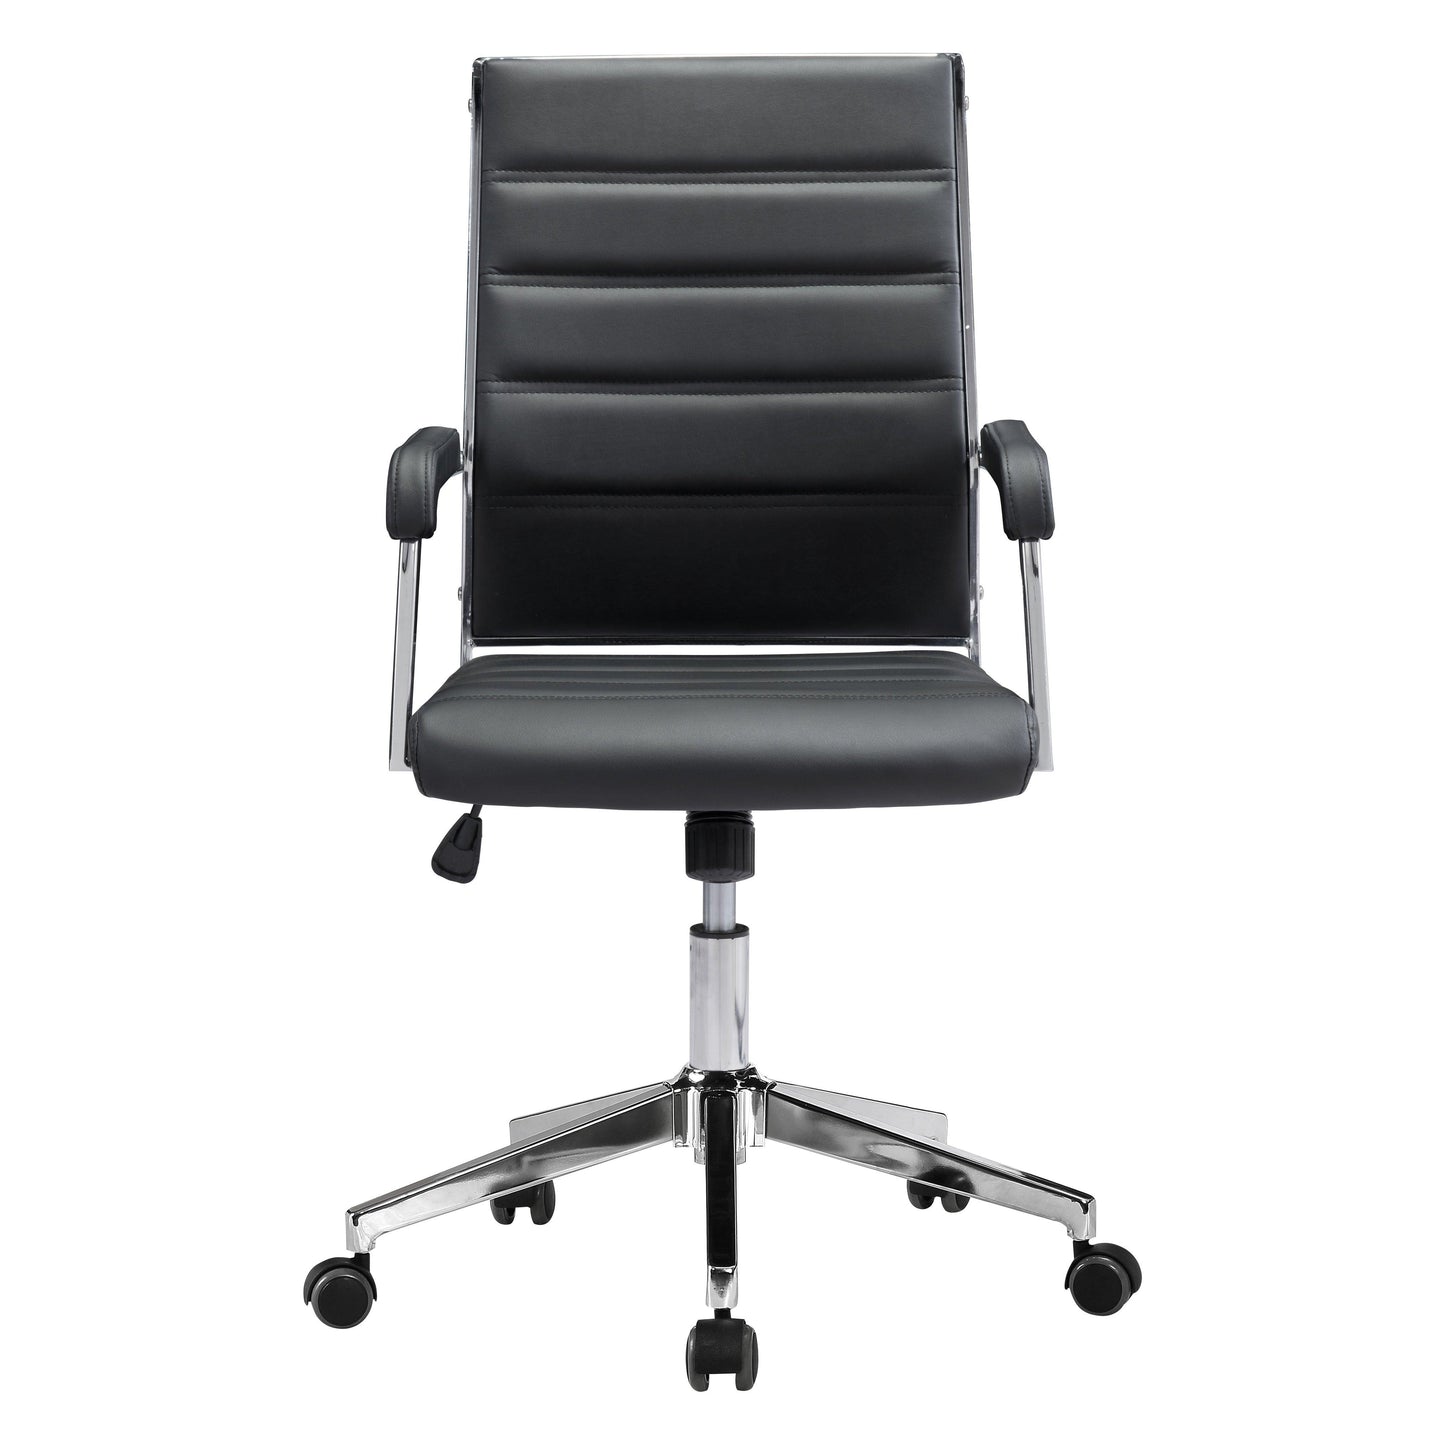 Liderato Office Chair Black - Sideboards and Things Brand_Zuo Modern, Color_Black, Color_Silver, Depth_20-30, Features_Adjustable Height, Features_Swivel, Finish_Polished, Height_30-40, Materials_Metal, Materials_Upholstery, Metal Type_Steel, Upholstery Type_Leather, Upholstery Type_Vegan Leather, Width_20-30